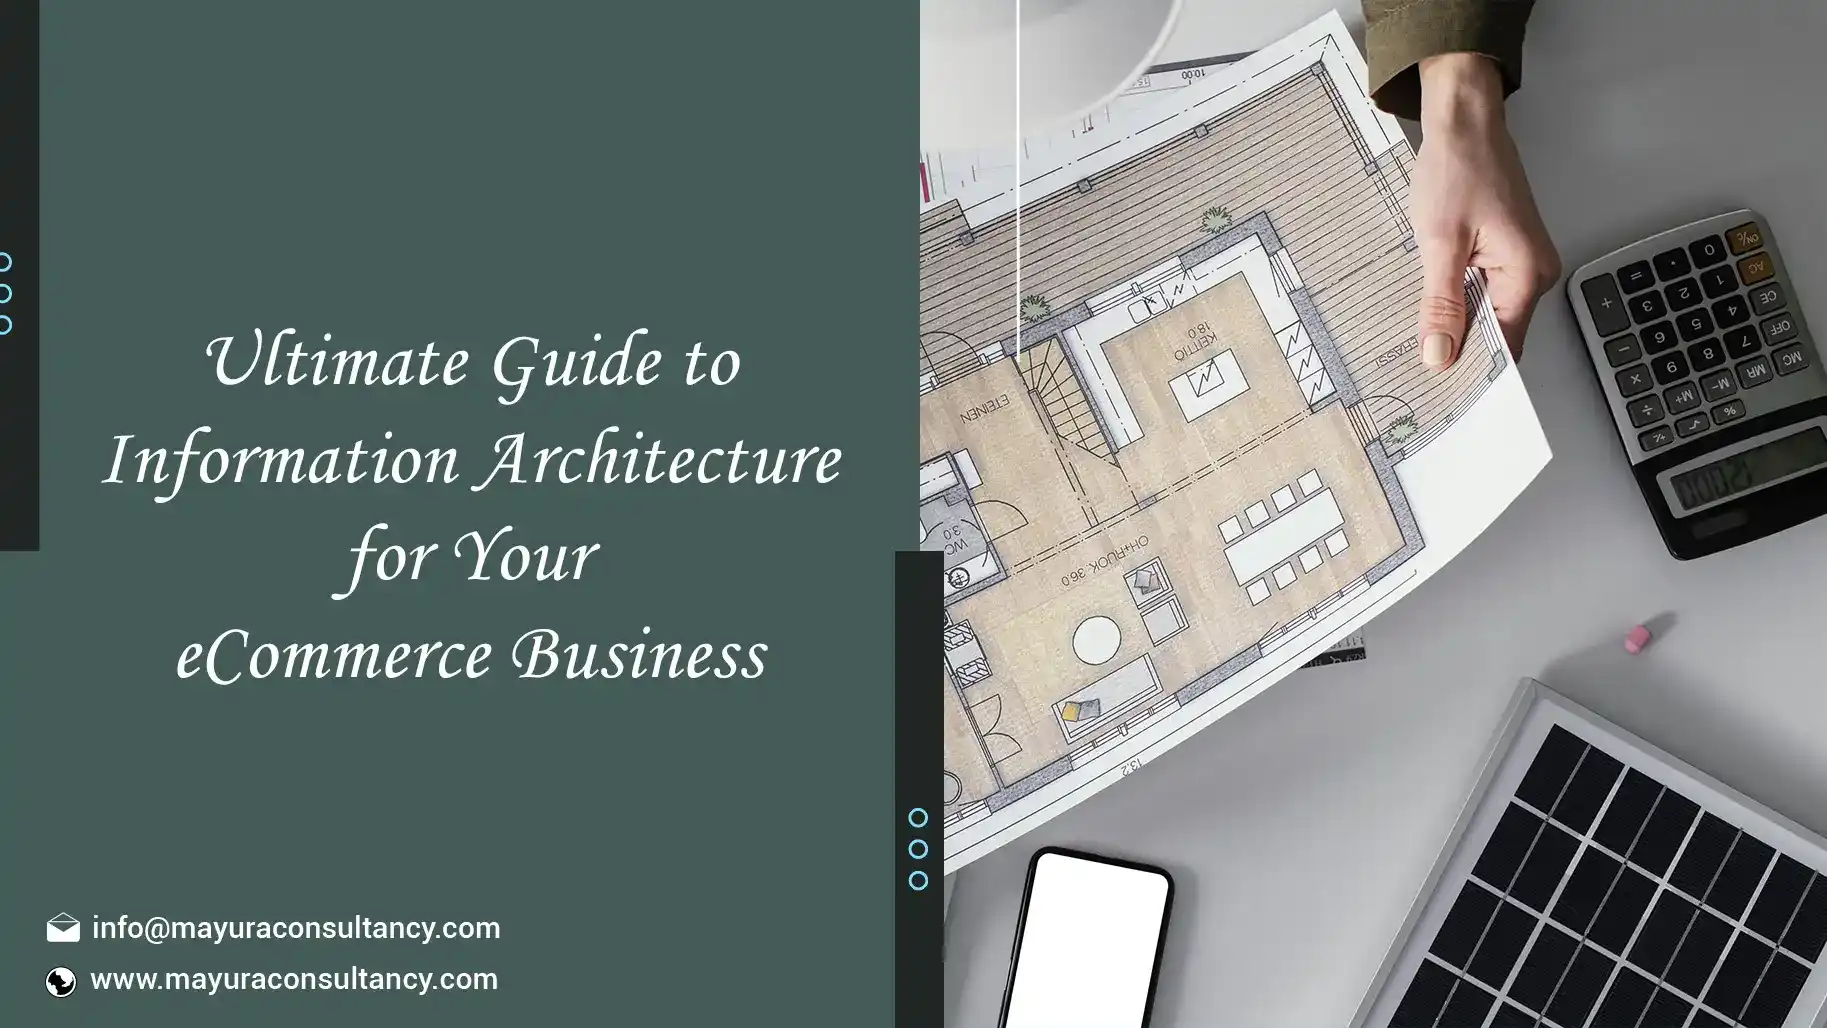 A Guide to Information Architecture for Your Ecommerce Business